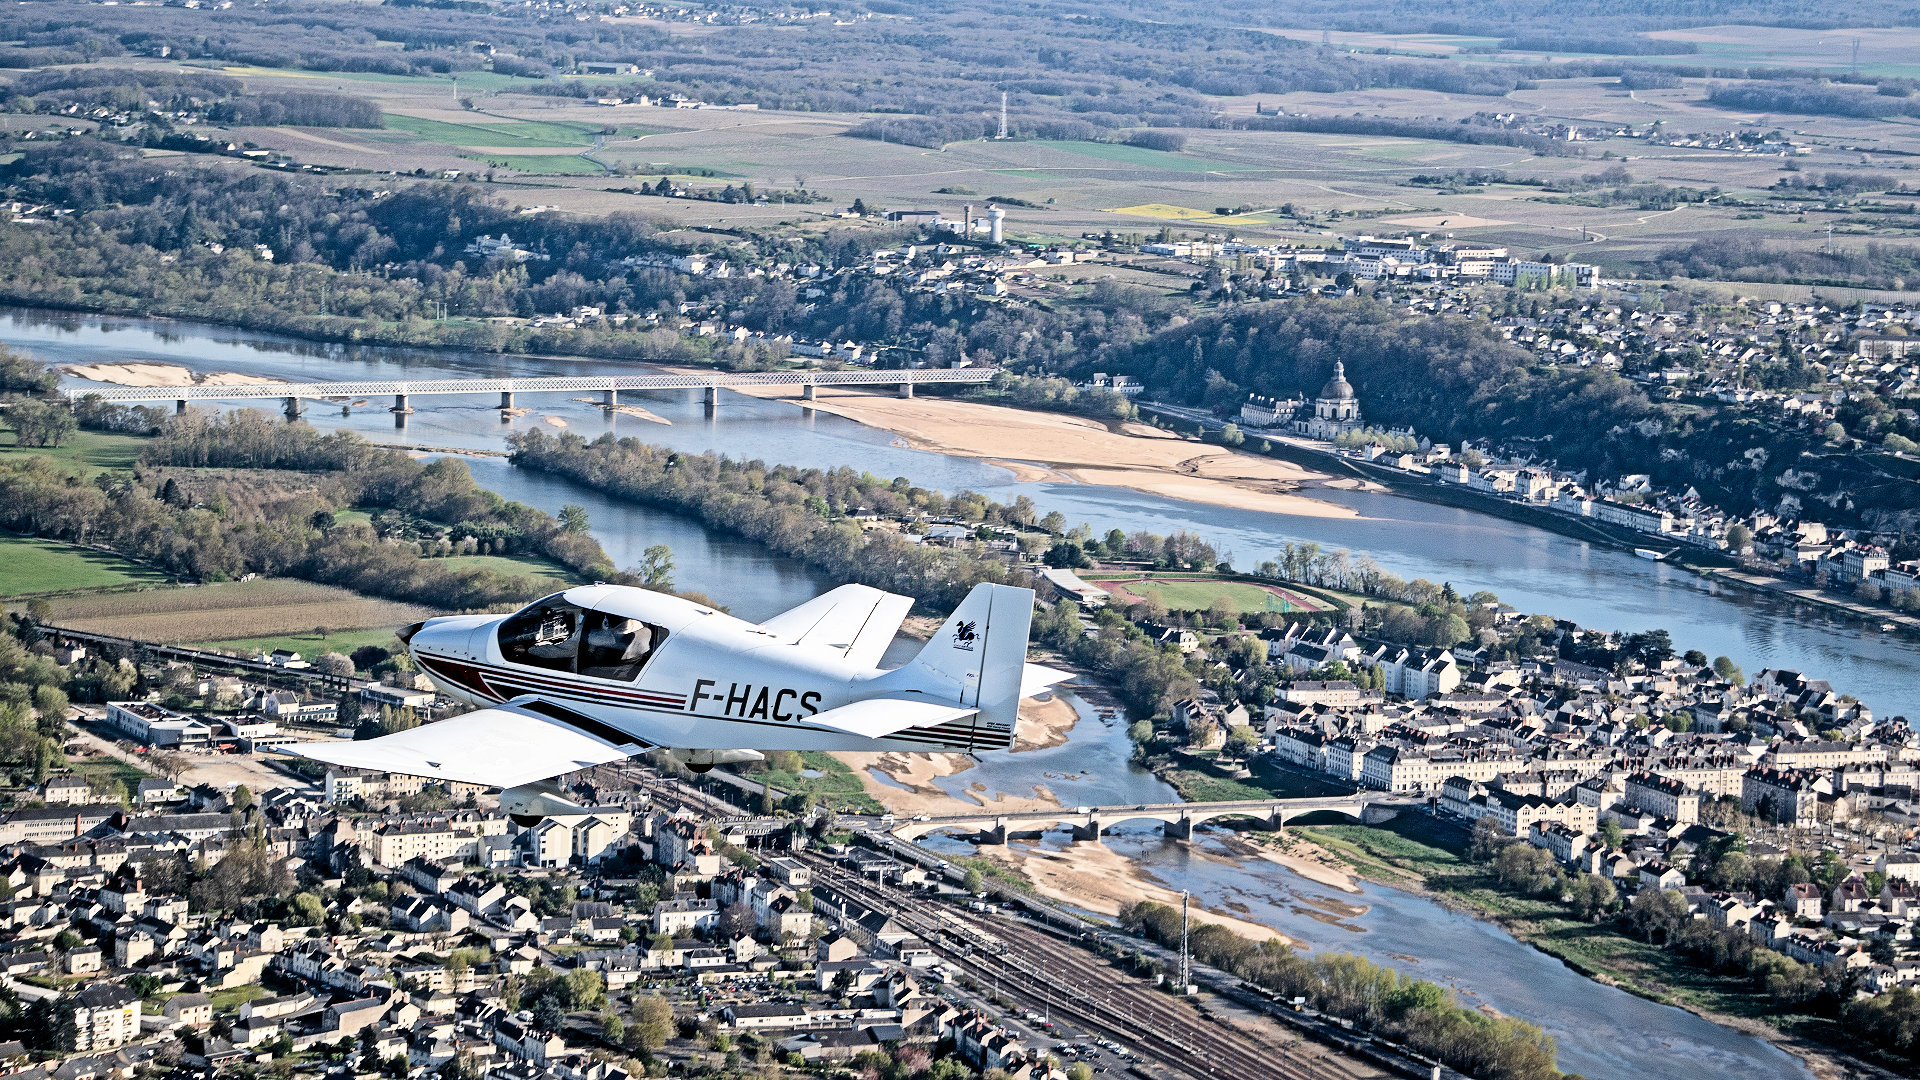 Overflying city of Saumur on board the Saumur Air Club DR 400